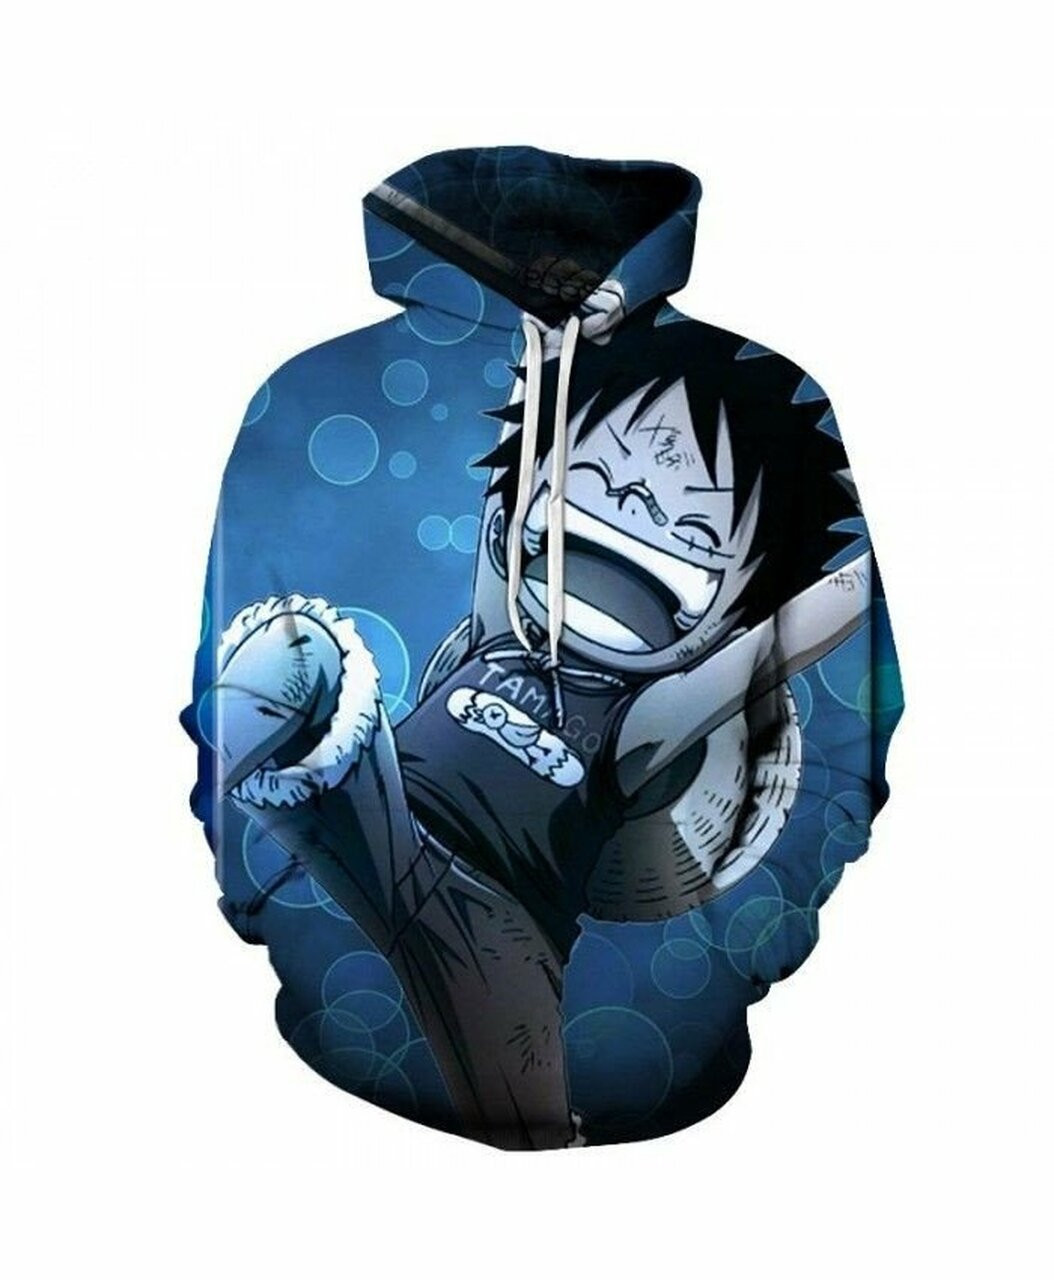 Pour To The Right One Piece Anime 3d All Over Print Hoodie